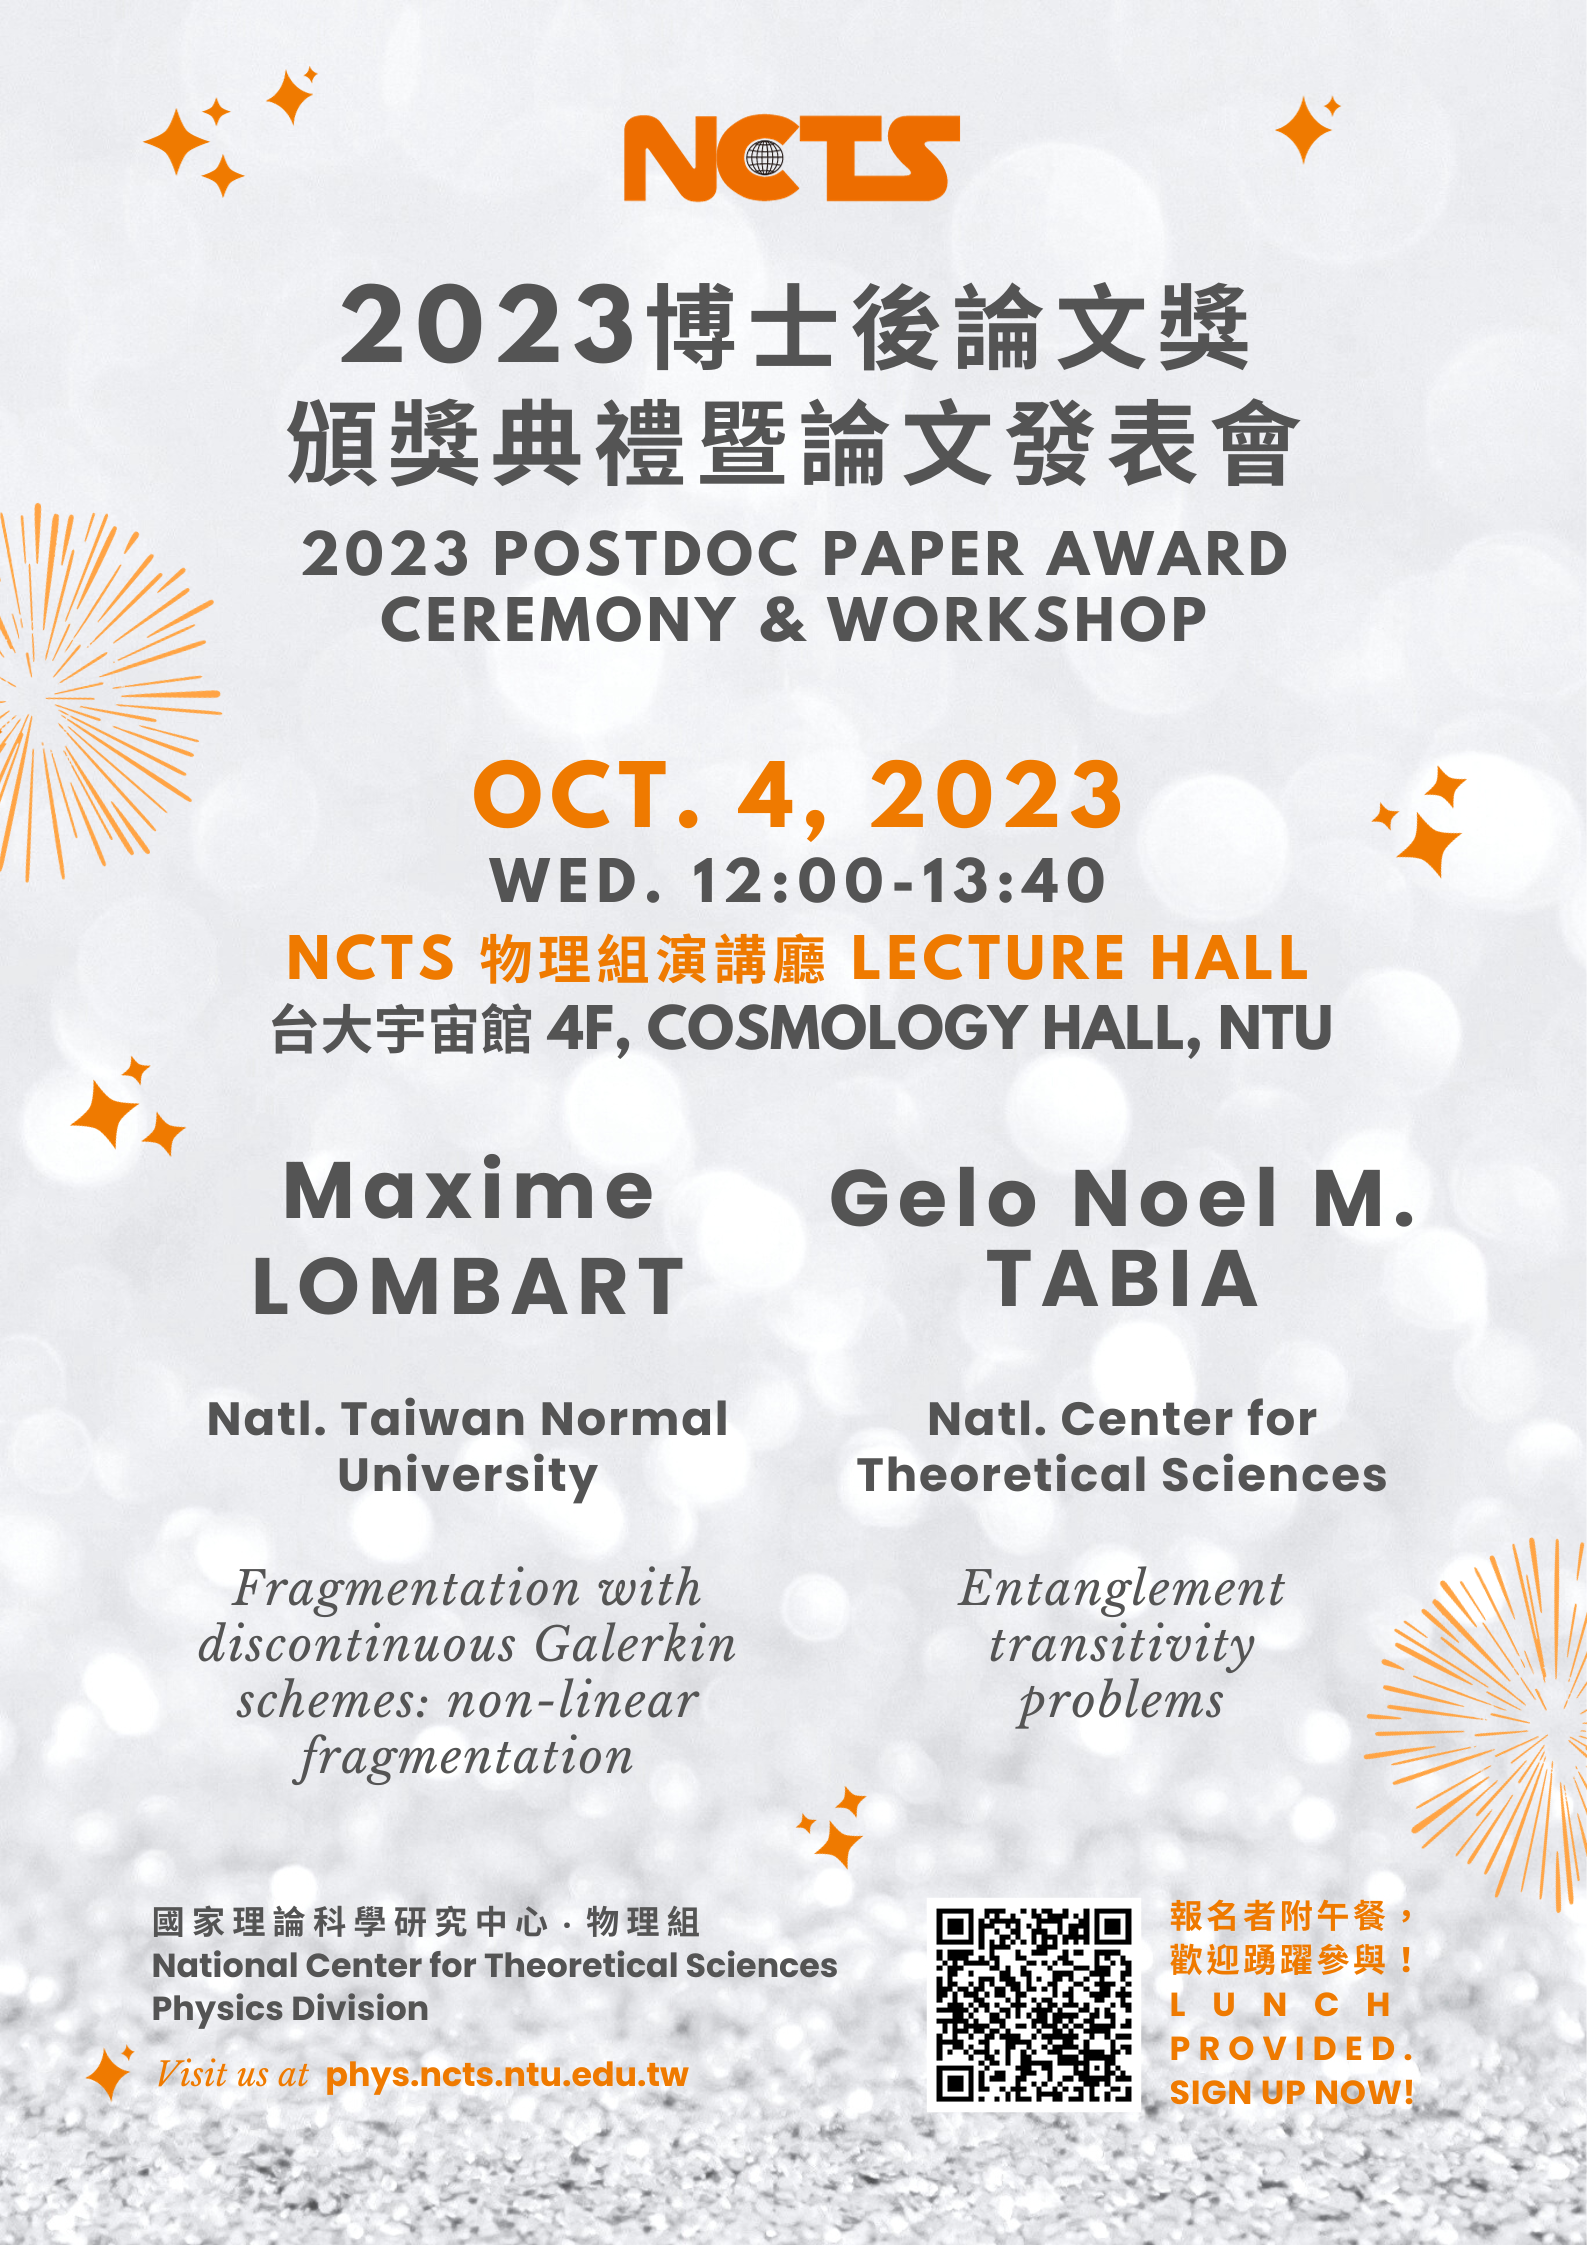 NCTS-Phys 2023 Postdoc Paper Award Ceremony & Workshop